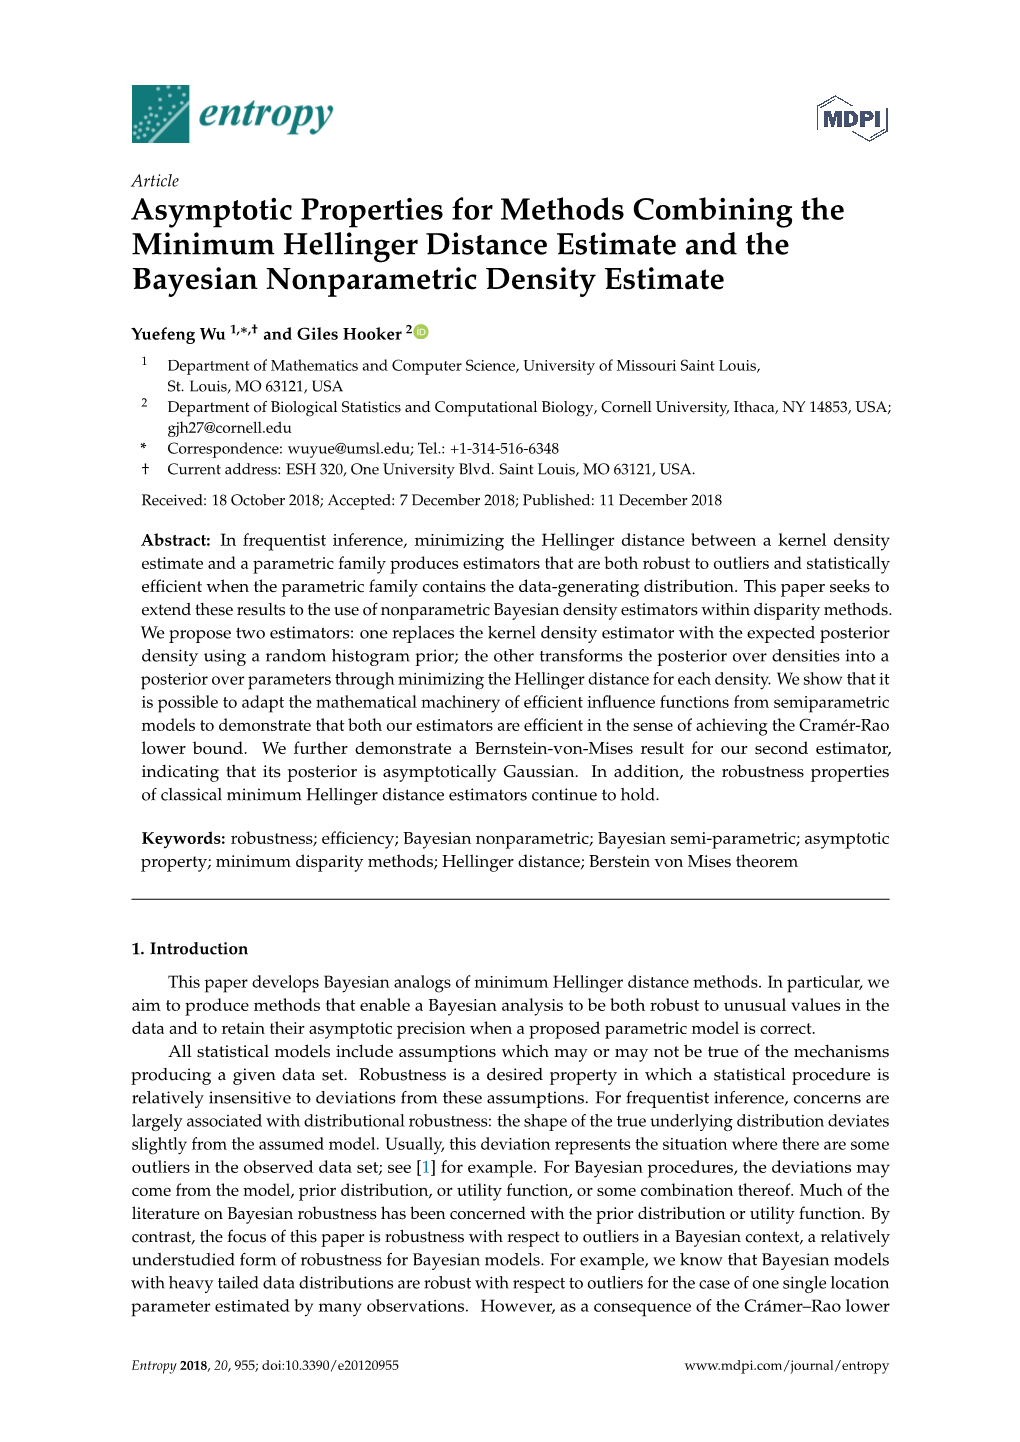 Asymptotic Properties for Methods Combining the Minimum Hellinger Distance Estimate and the Bayesian Nonparametric Density Estimate